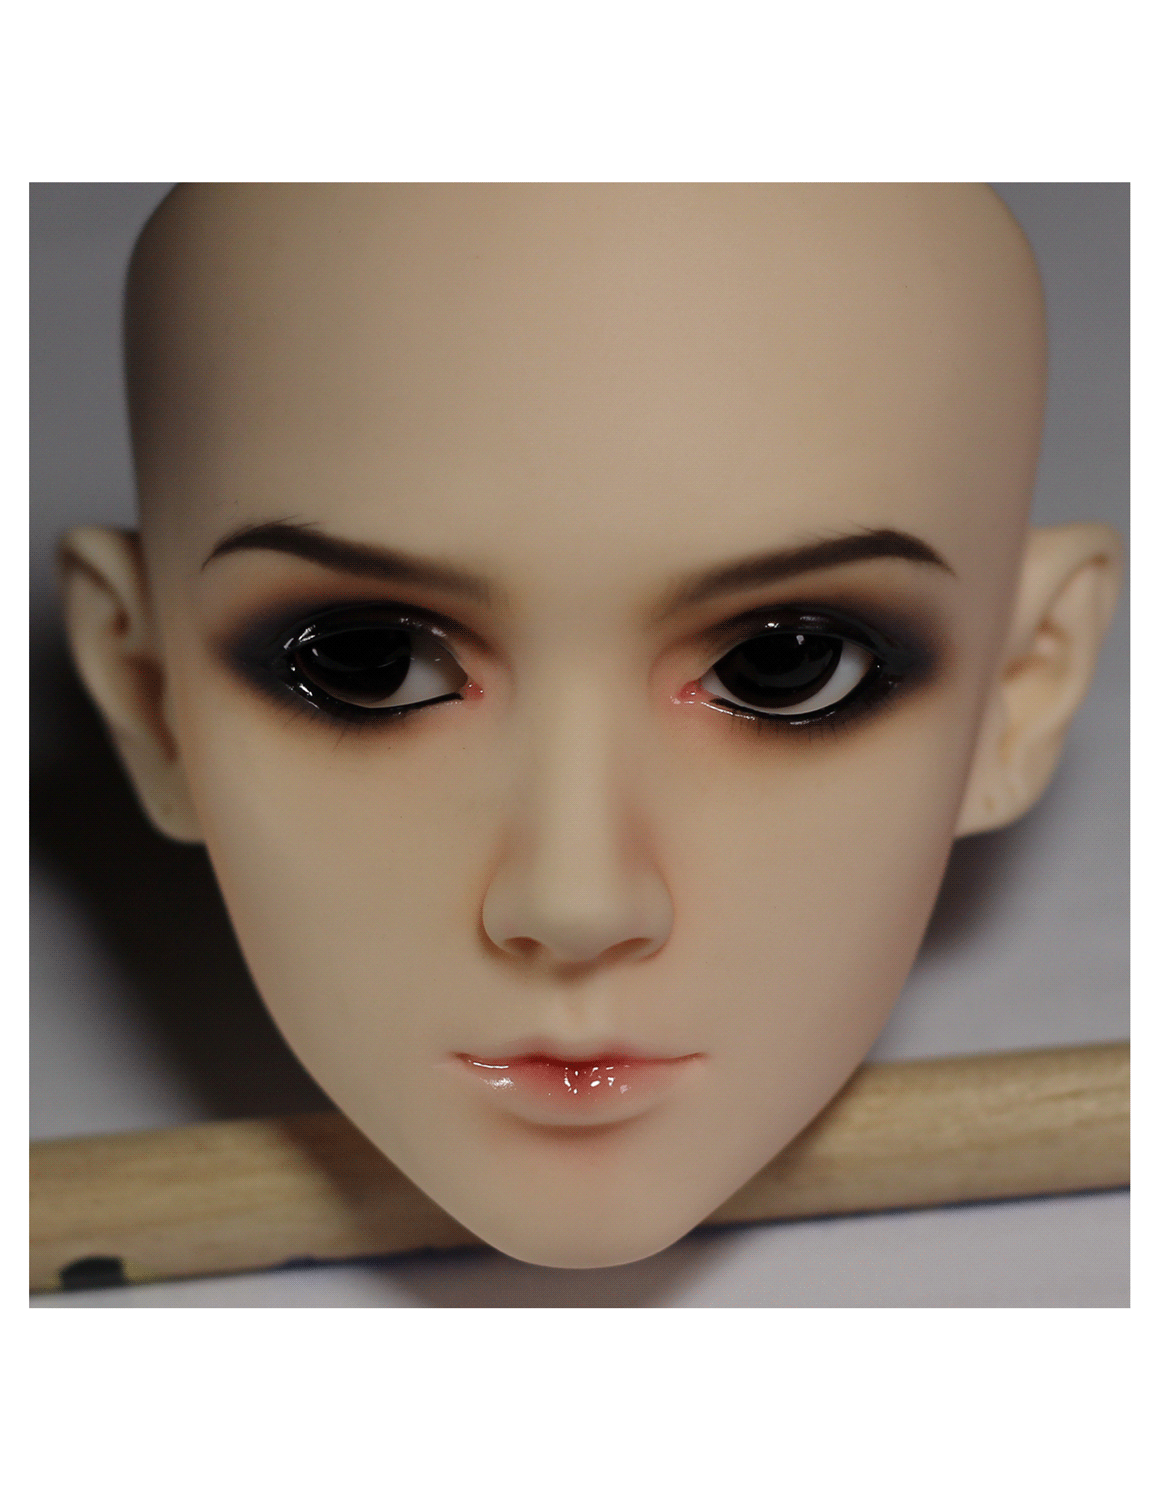 bjd ABJD doll Asian doll japan ball jointed doll faceup repaint restoration